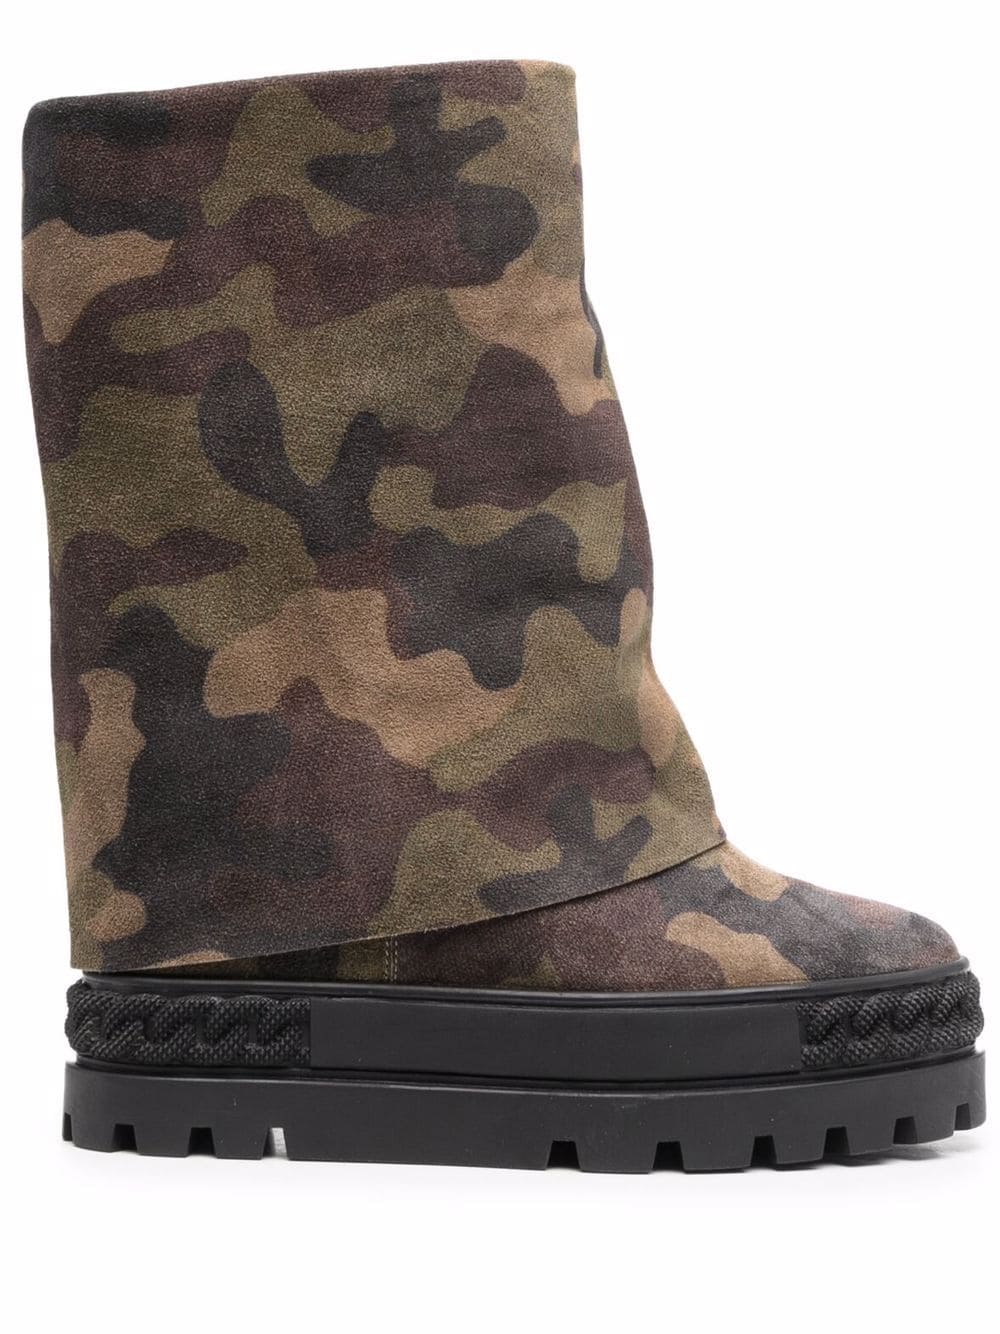 frugter Bror Spænding Casadei Generation X camouflage-print 80mm Boots - Farfetch